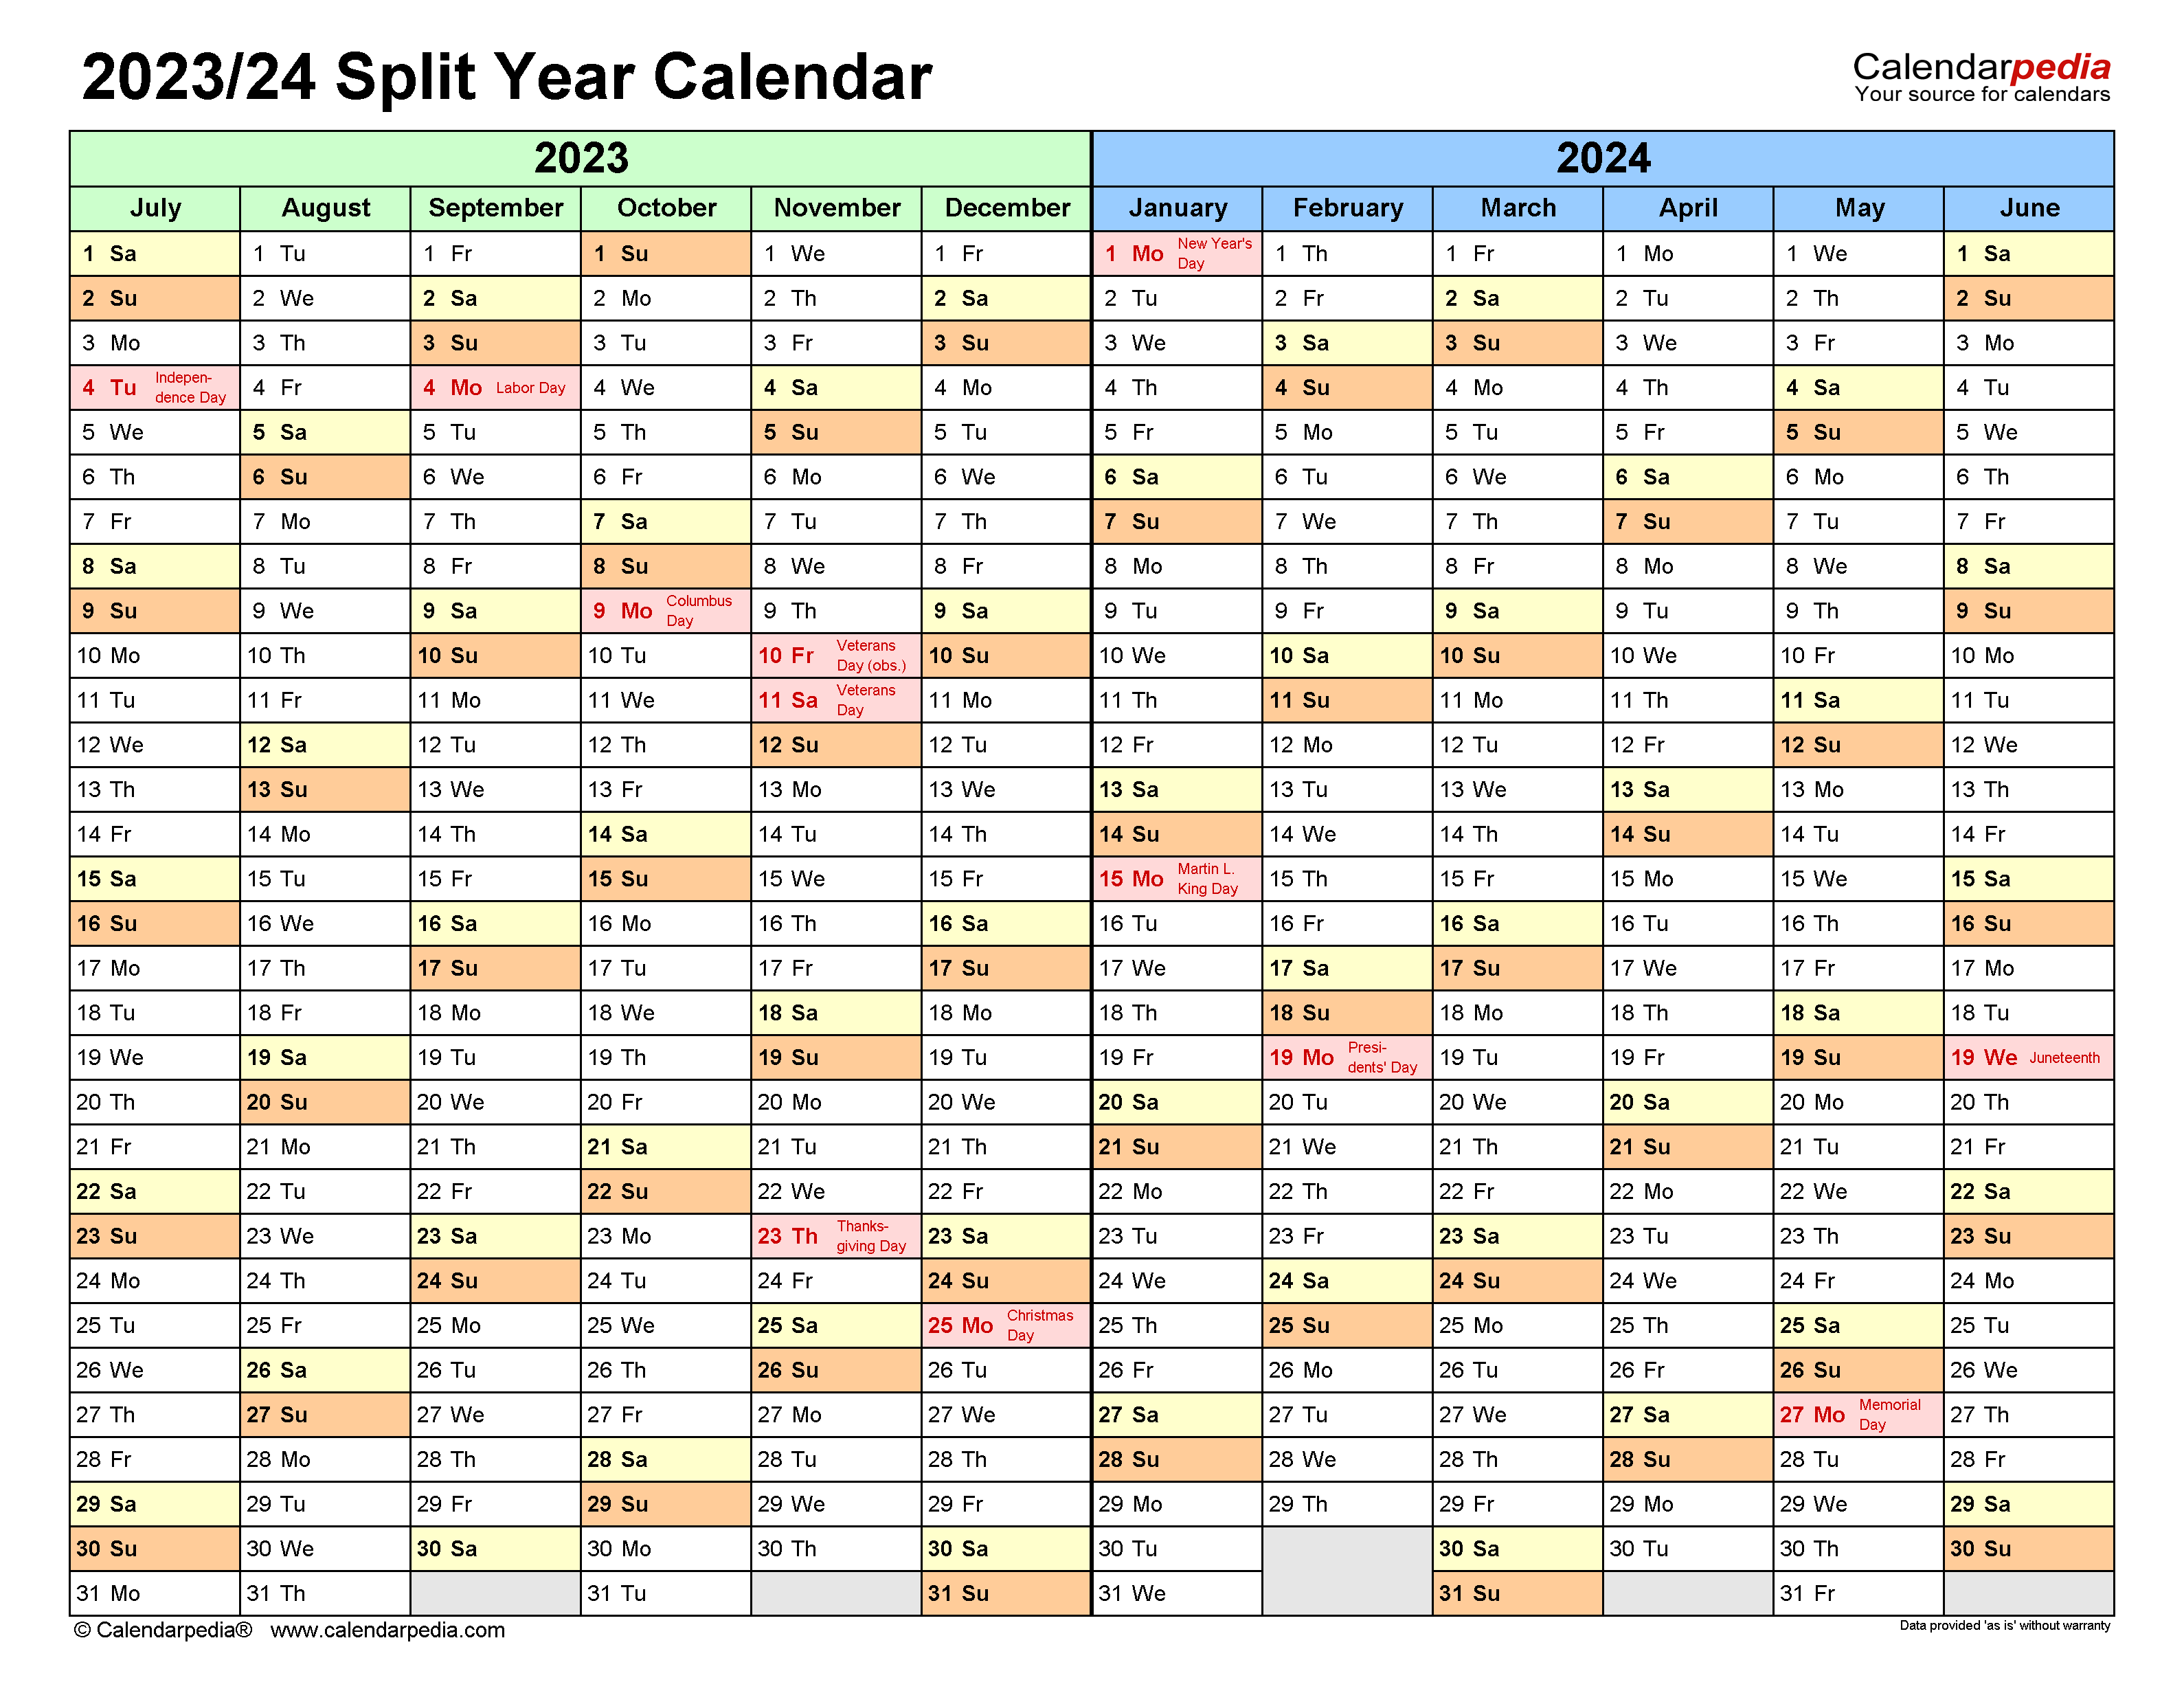 Split Year Calendars 2023/2024 (July To June) - Pdf Templates within Free Printable Calendar August 2023-June 2024